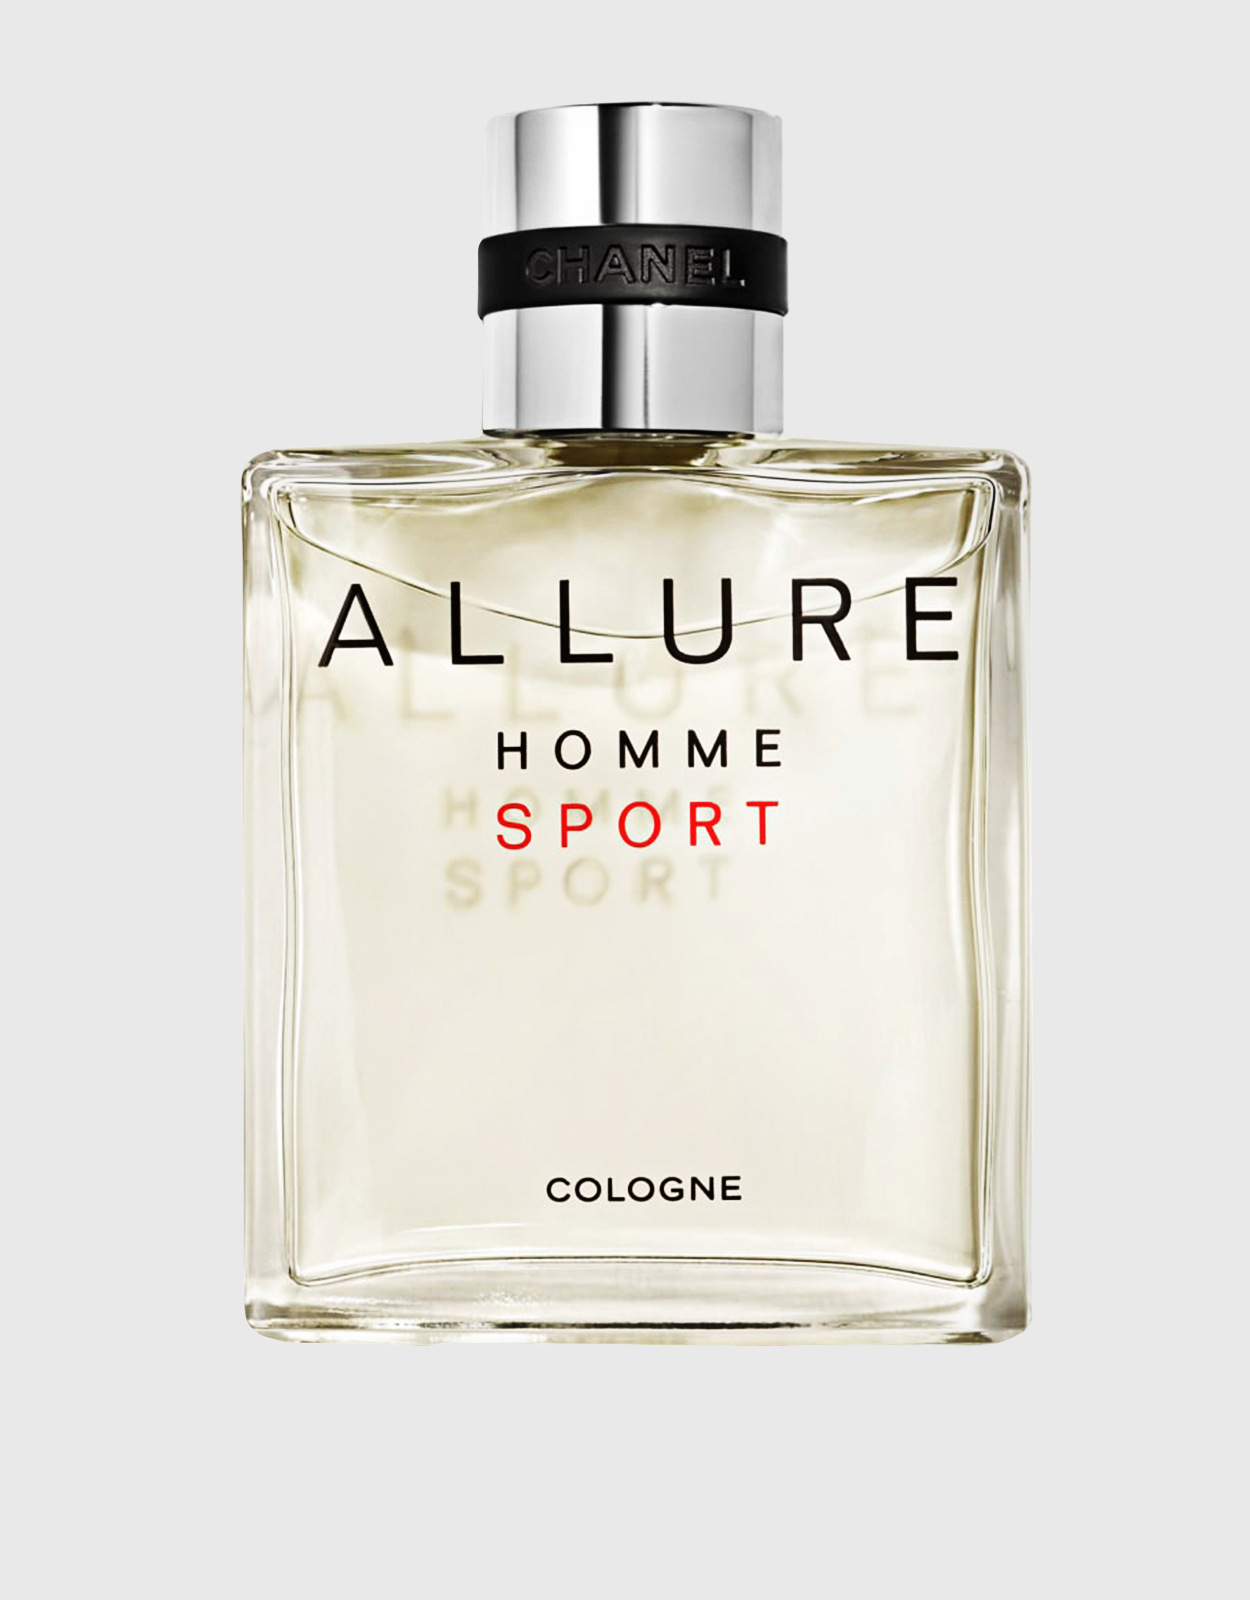 Buy Chanel Allure Homme Sport Cologne from £78.00 (Today) – Best Deals on